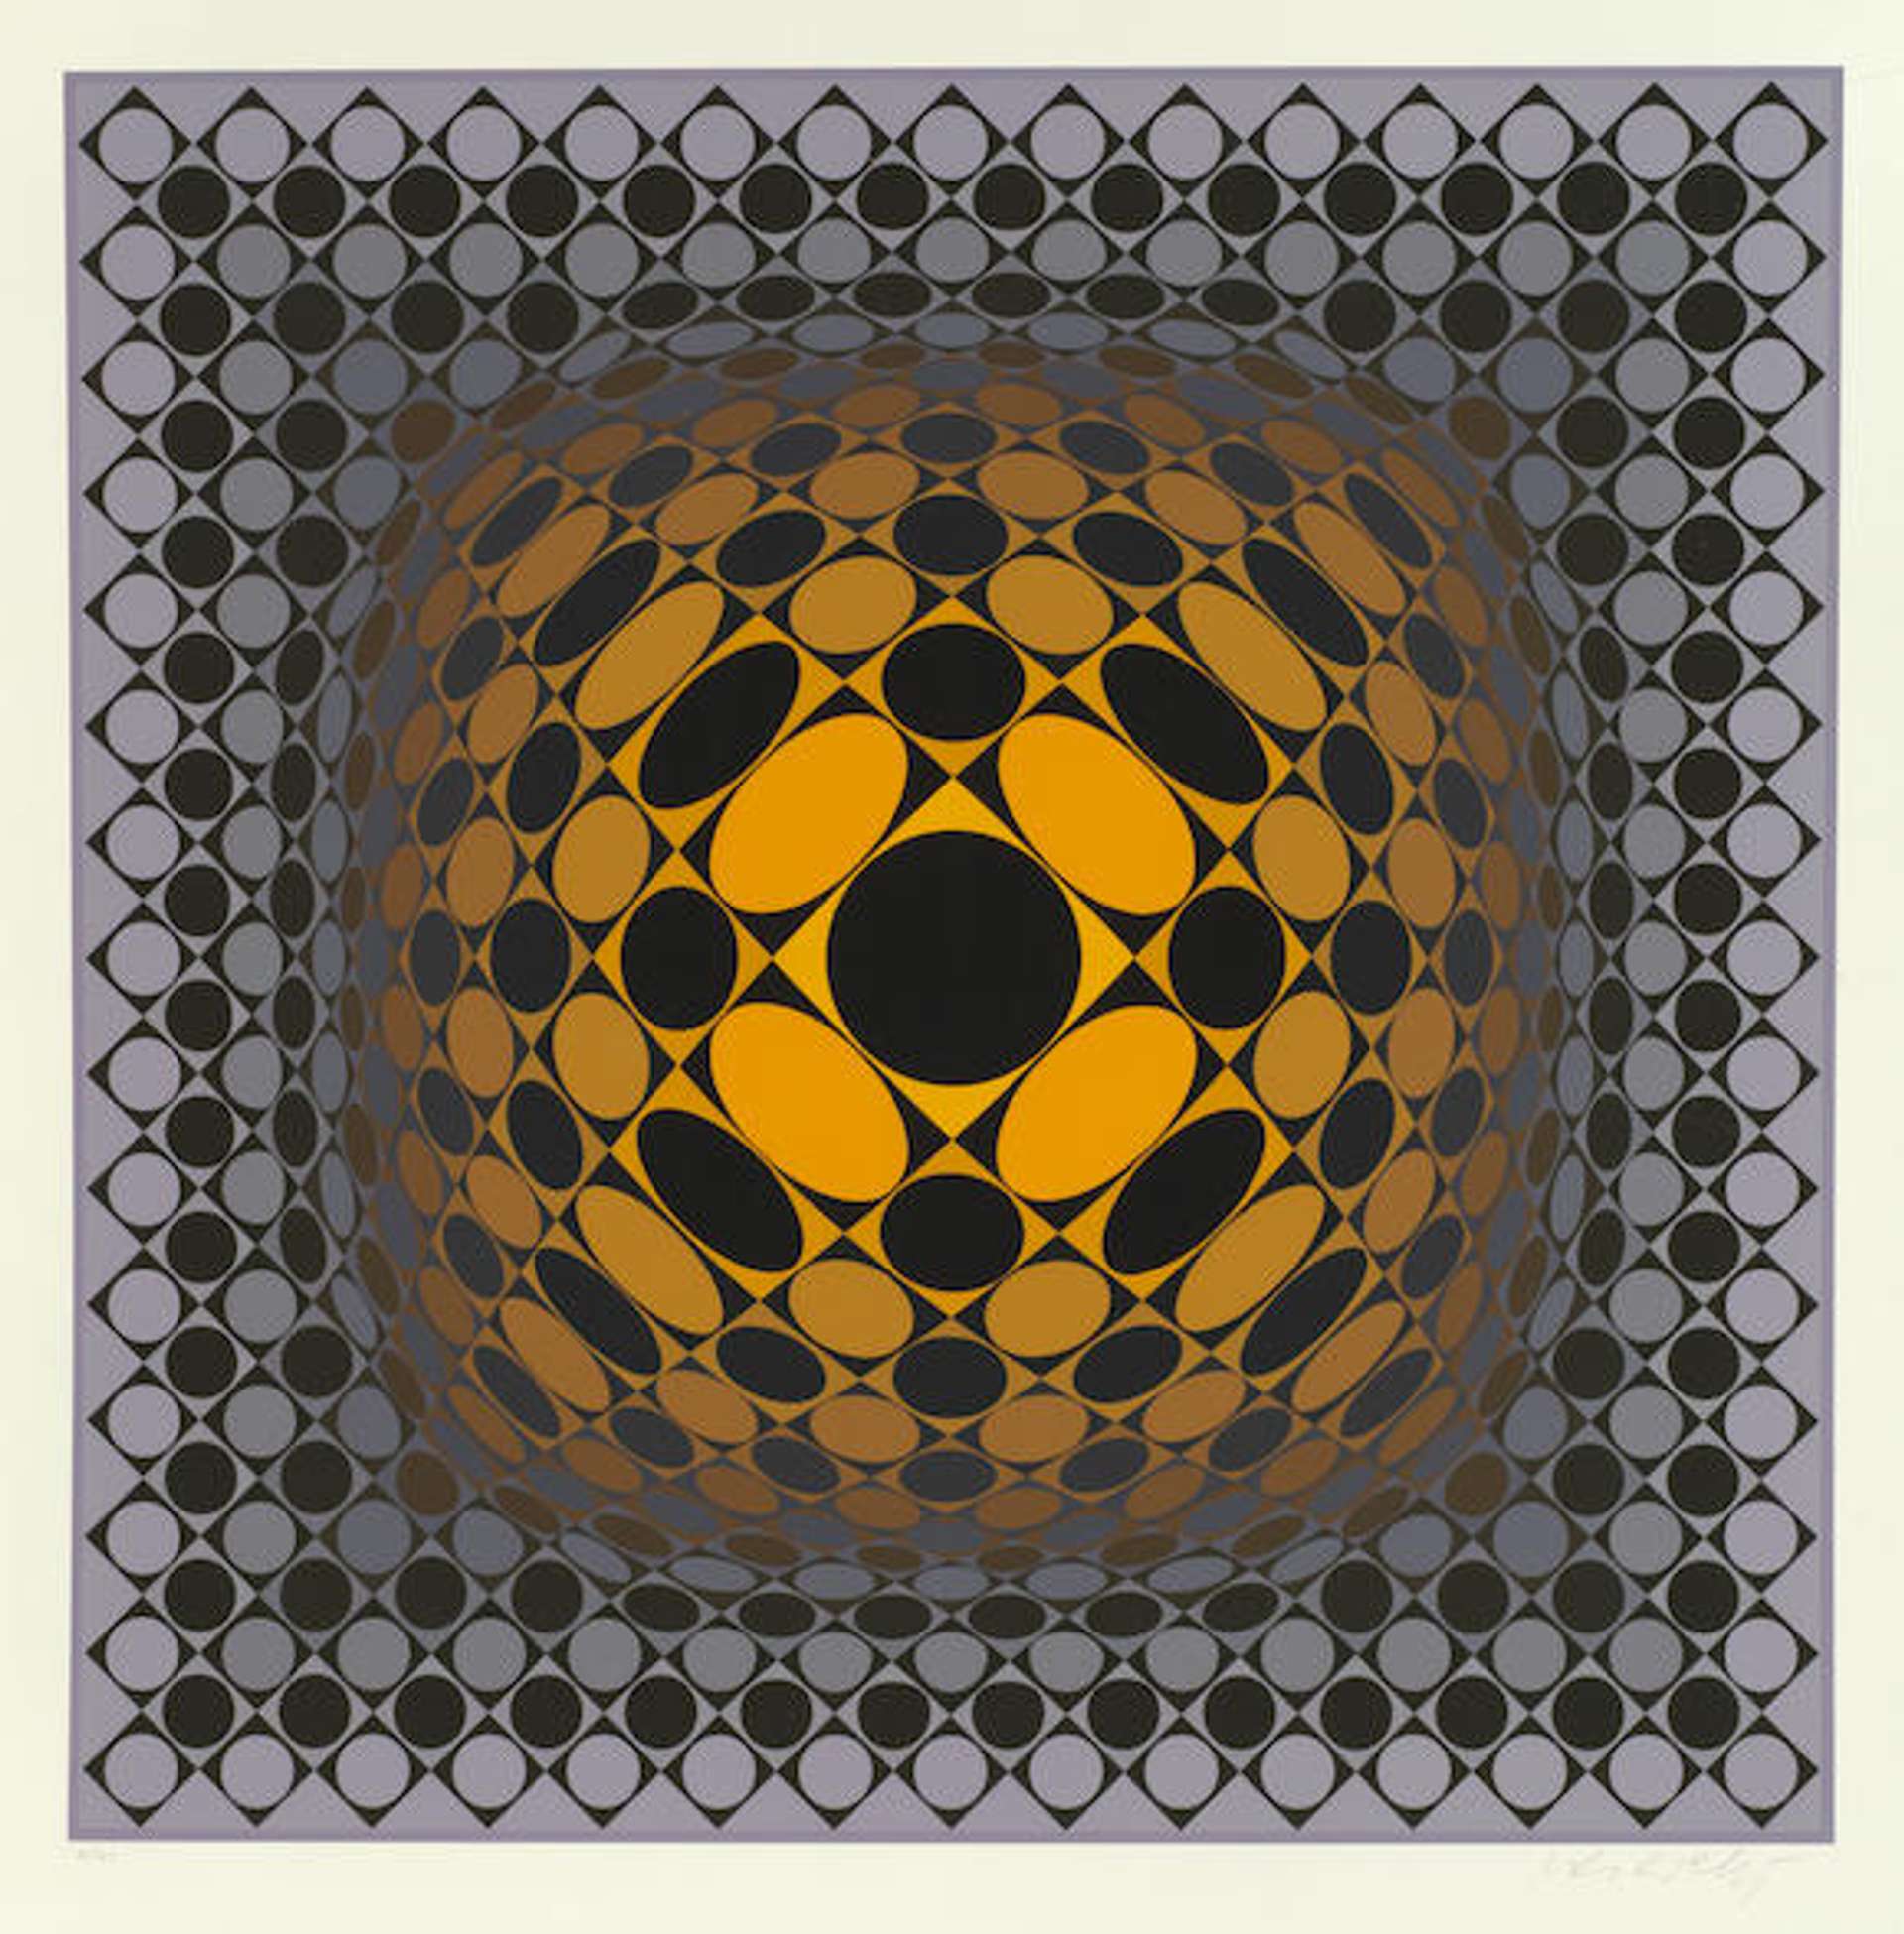 Vega-Sakk by Victor Vasarely (1979). A geometric abstract artwork featuring a combination of colourful squares, ovals and circles, arranged in a three-dimensional appearing grid.